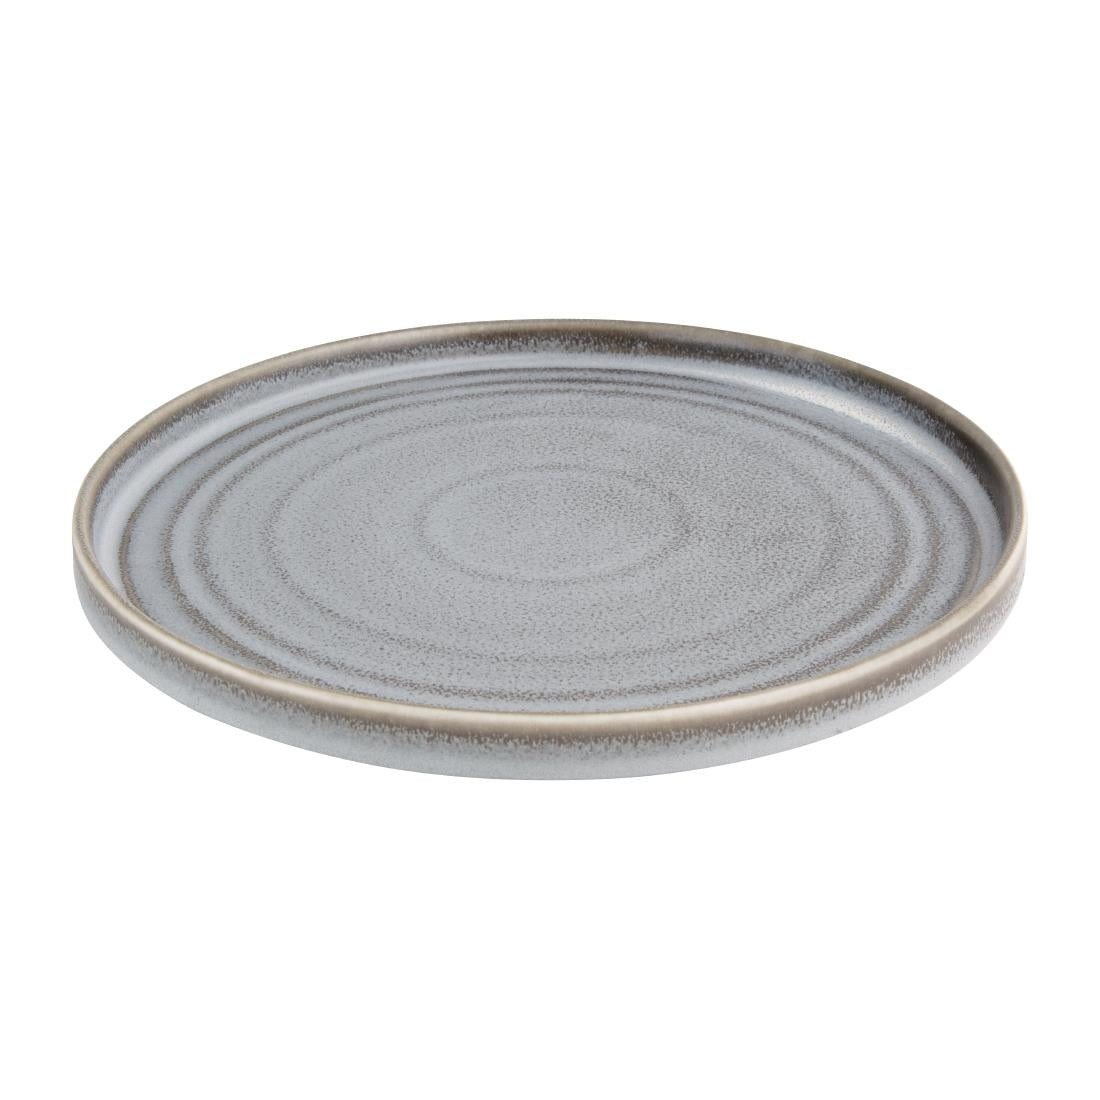 FD922 Olympia Cavolo Charcoal Dusk Flat Round Plates 270mm (Pack of 4) JD Catering Equipment Solutions Ltd